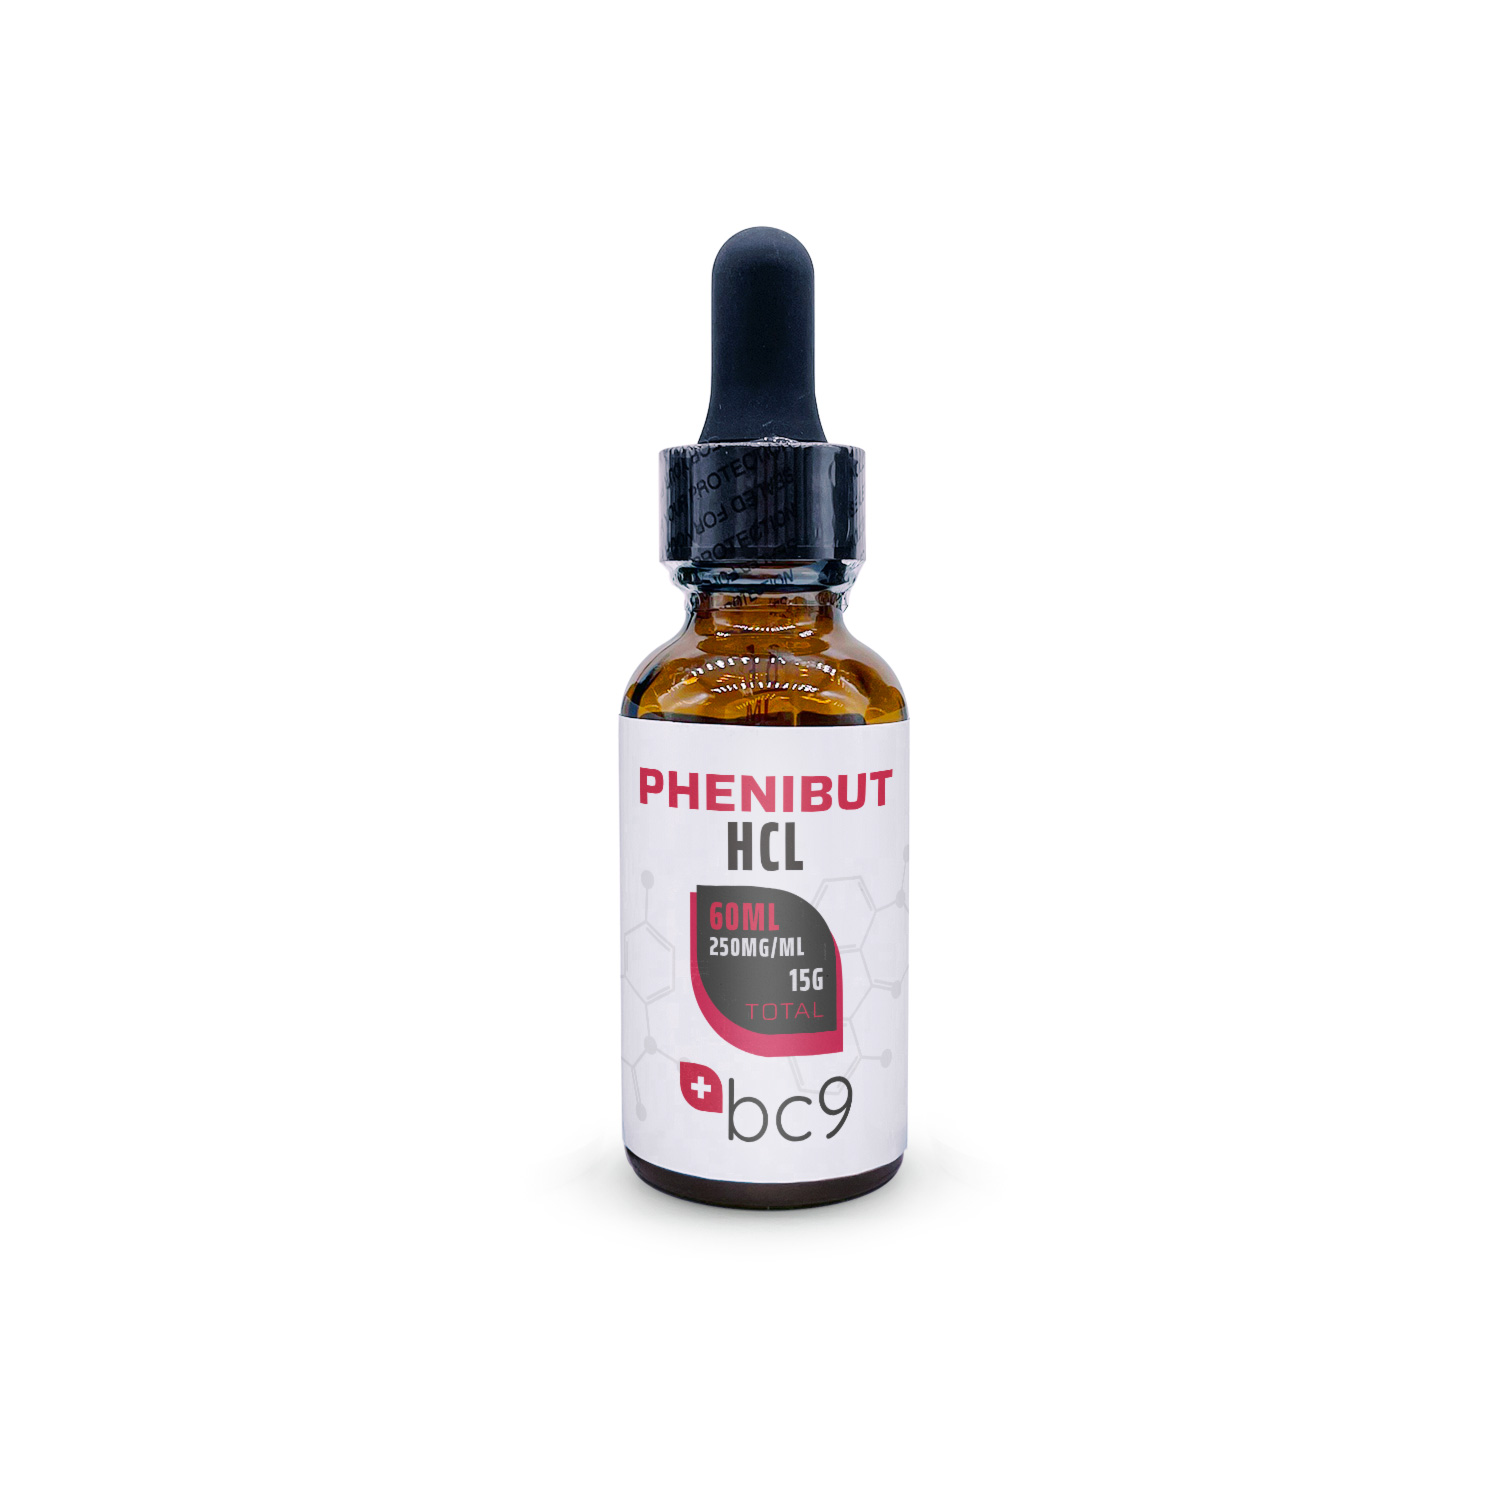 Phenibut HCL Liquid For Sale | 3rd Party Tested | BC9.org